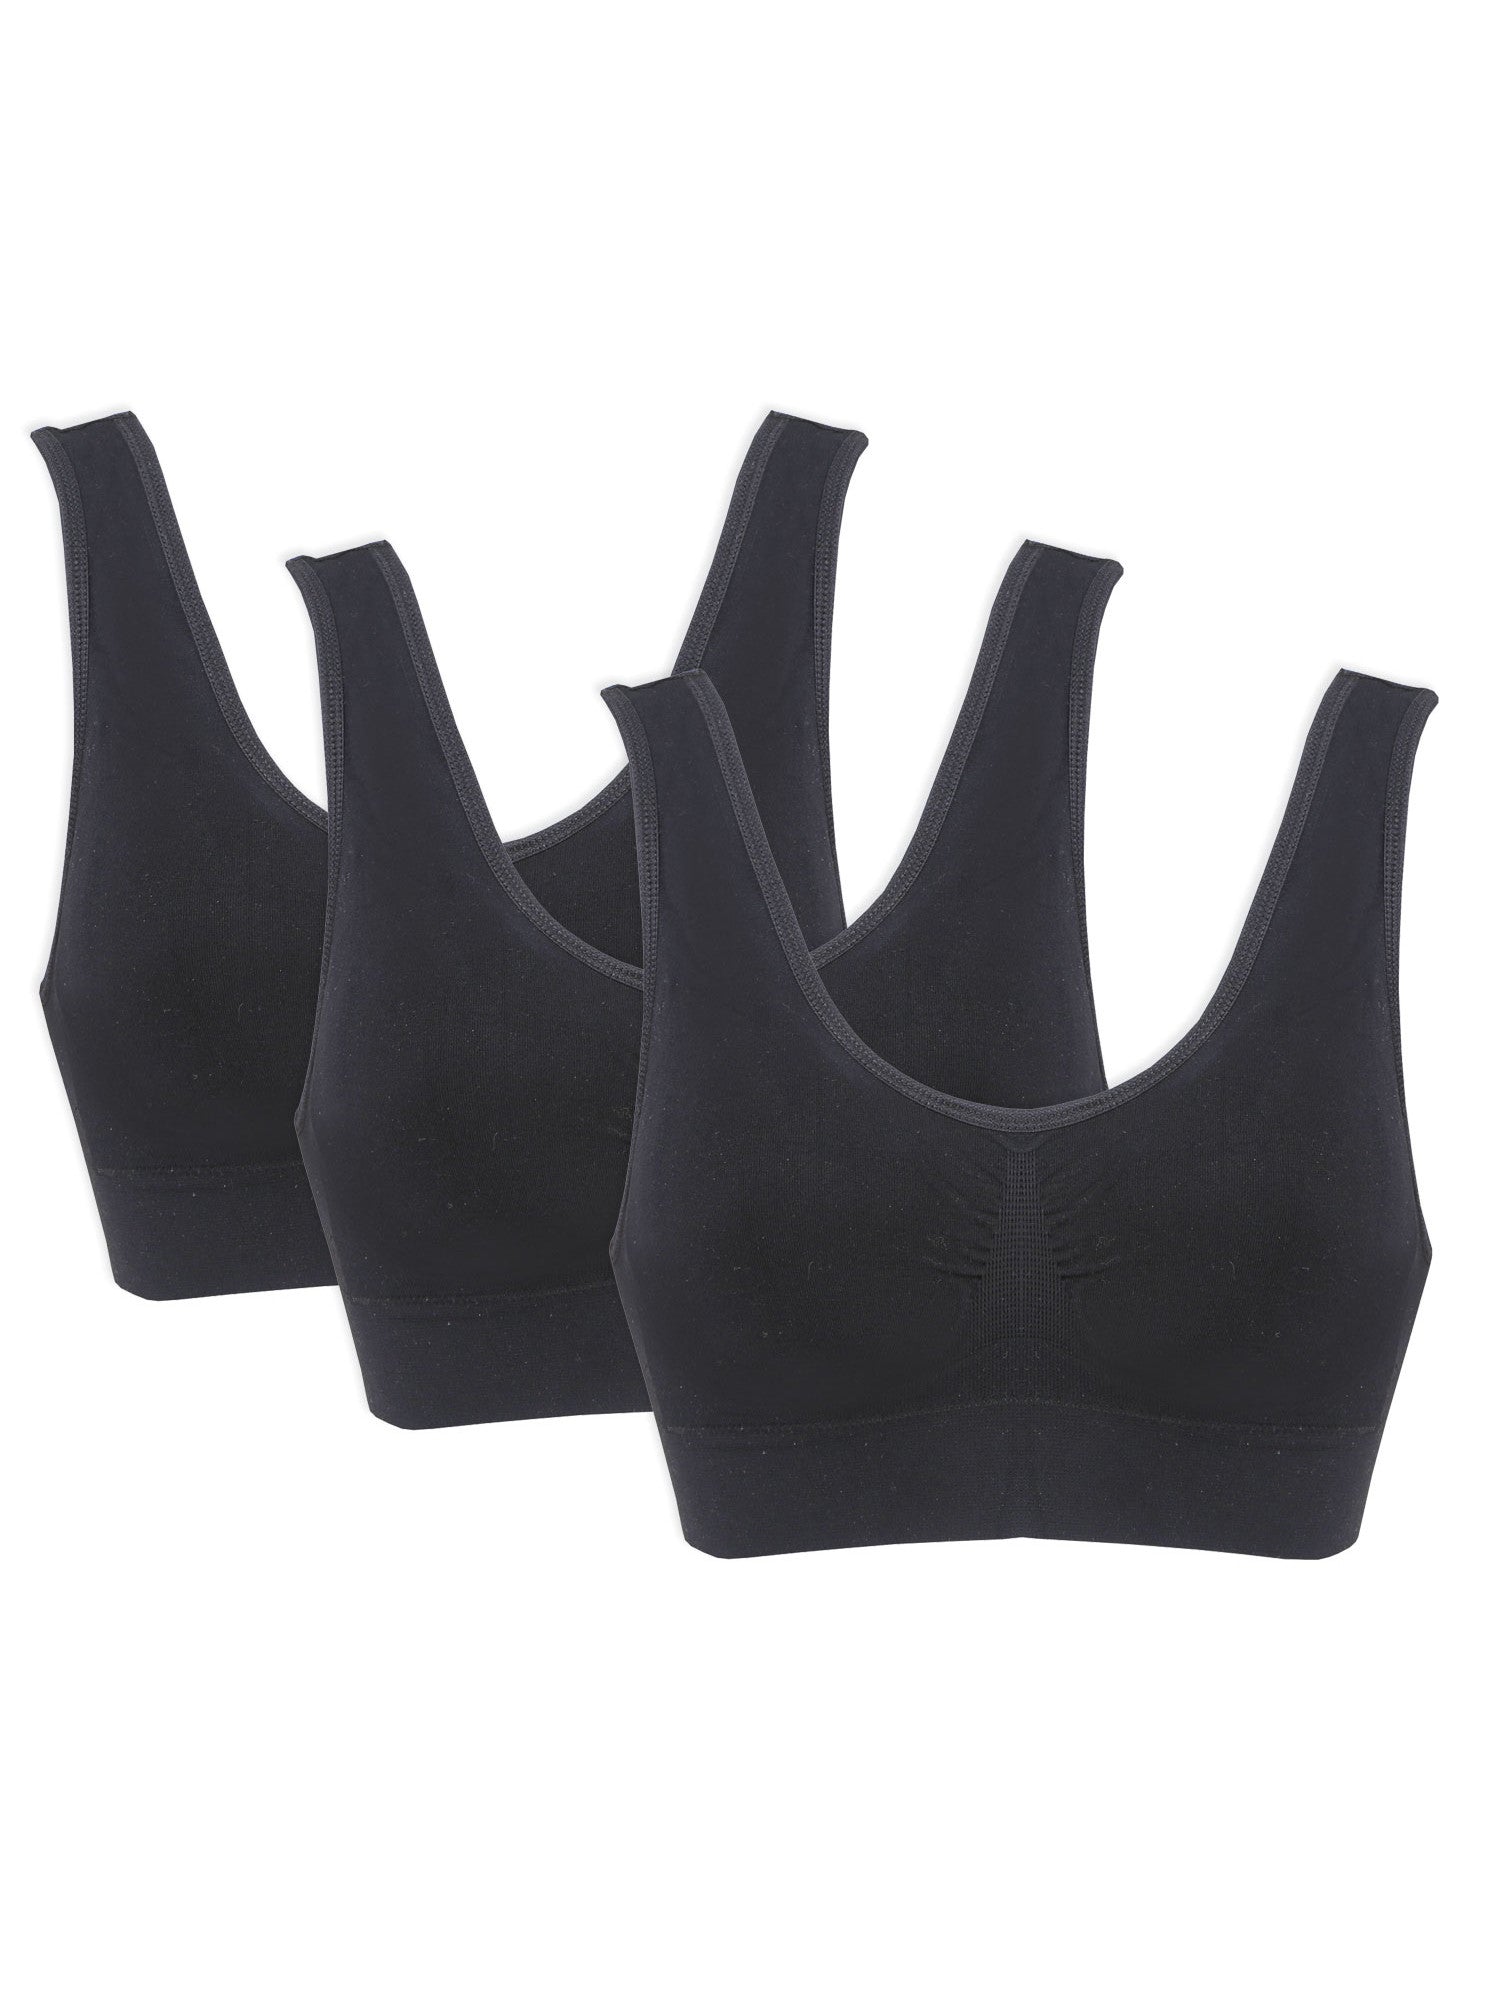 Dream by Genie Large Seamless Bra in Black for sale online